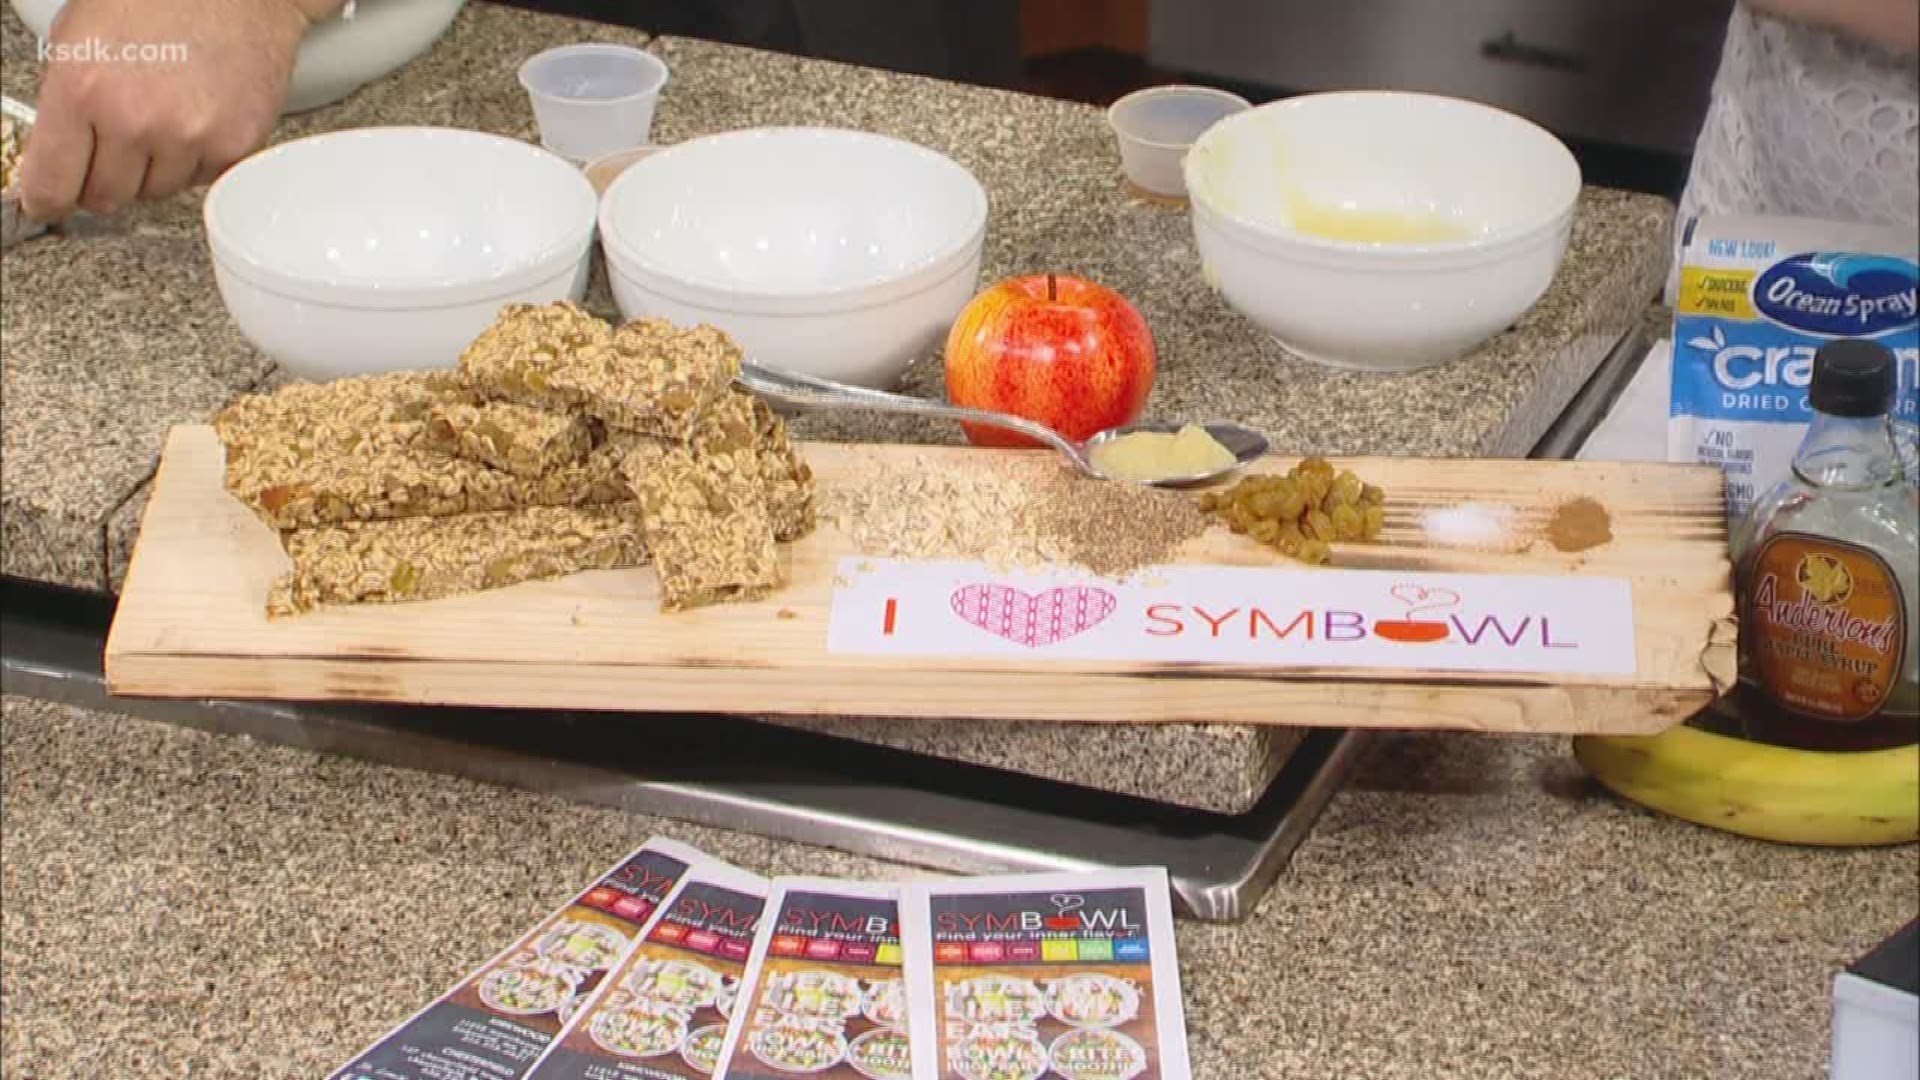 These oatmeal bars by Symbowl make a great snack for anytime.